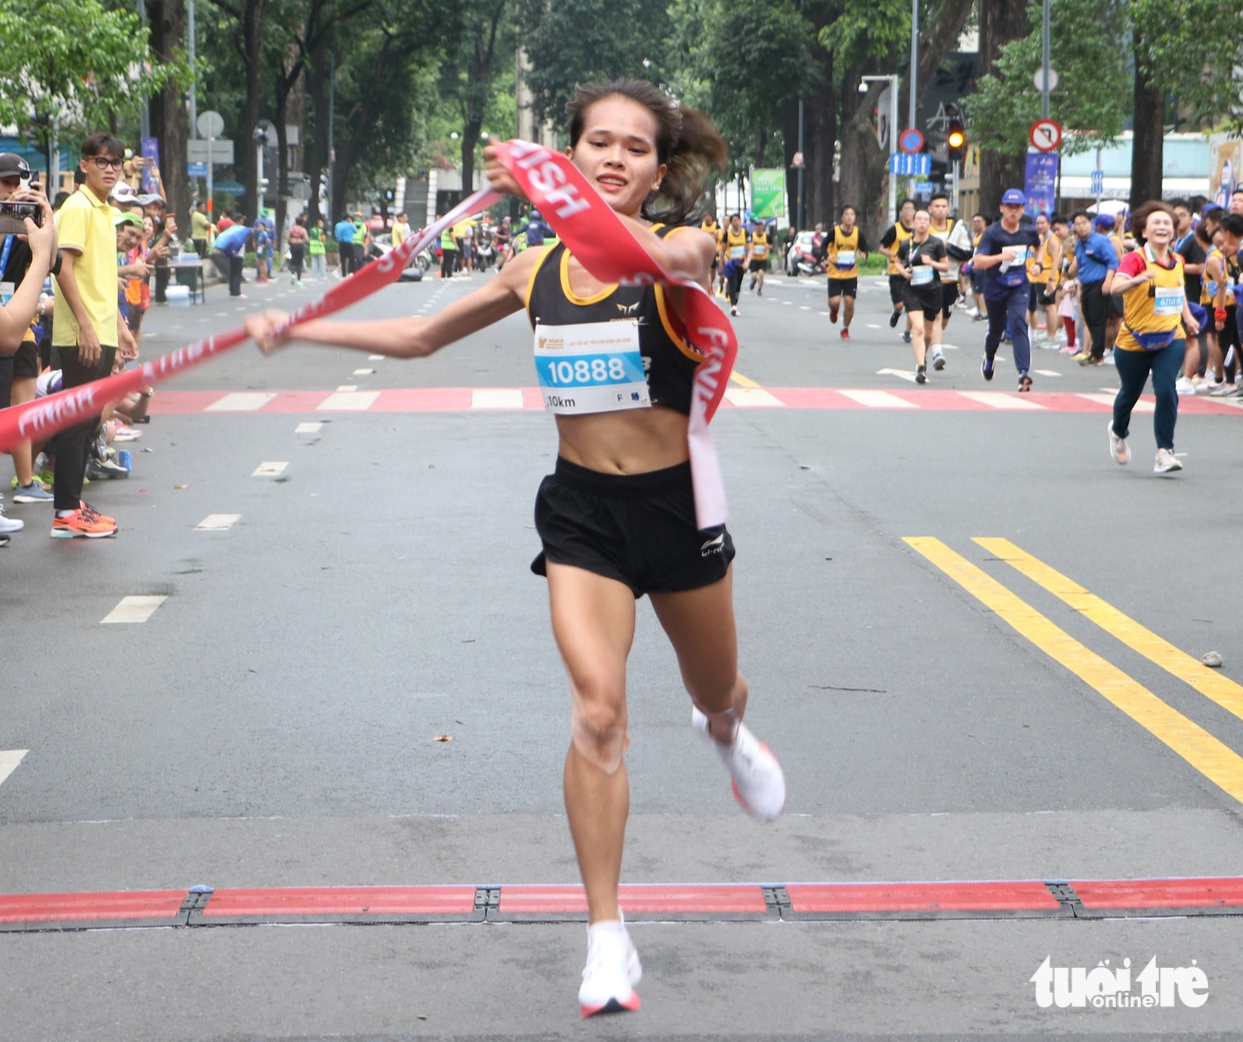 Athlete Pham Thi Hong Le finishes first in the women’s 10km event at the 2023 Marathon Dream Cup in Ho Chi Minh City, July 30, 2023. Photo: Binh Minh / Tuoi Tre